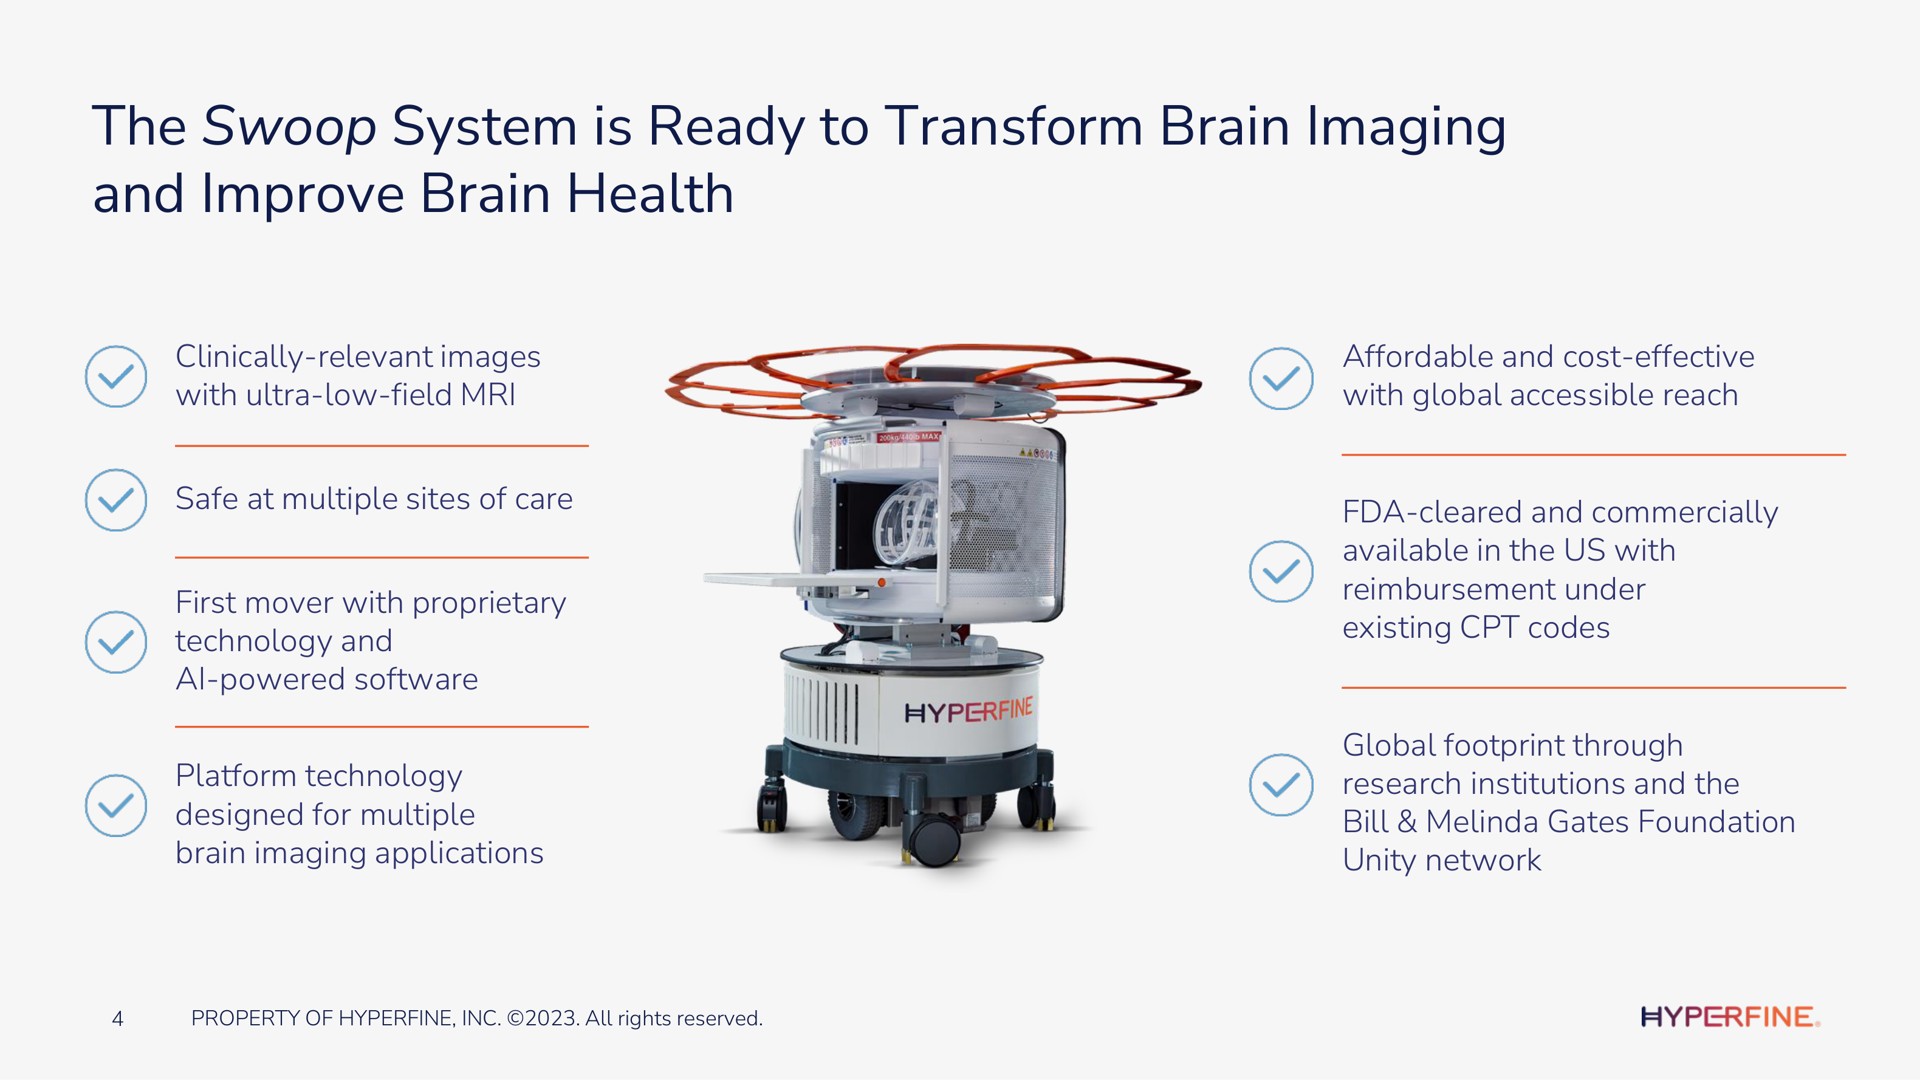 the swoop system is ready to transform brain imaging and improve brain health | Hyperfine